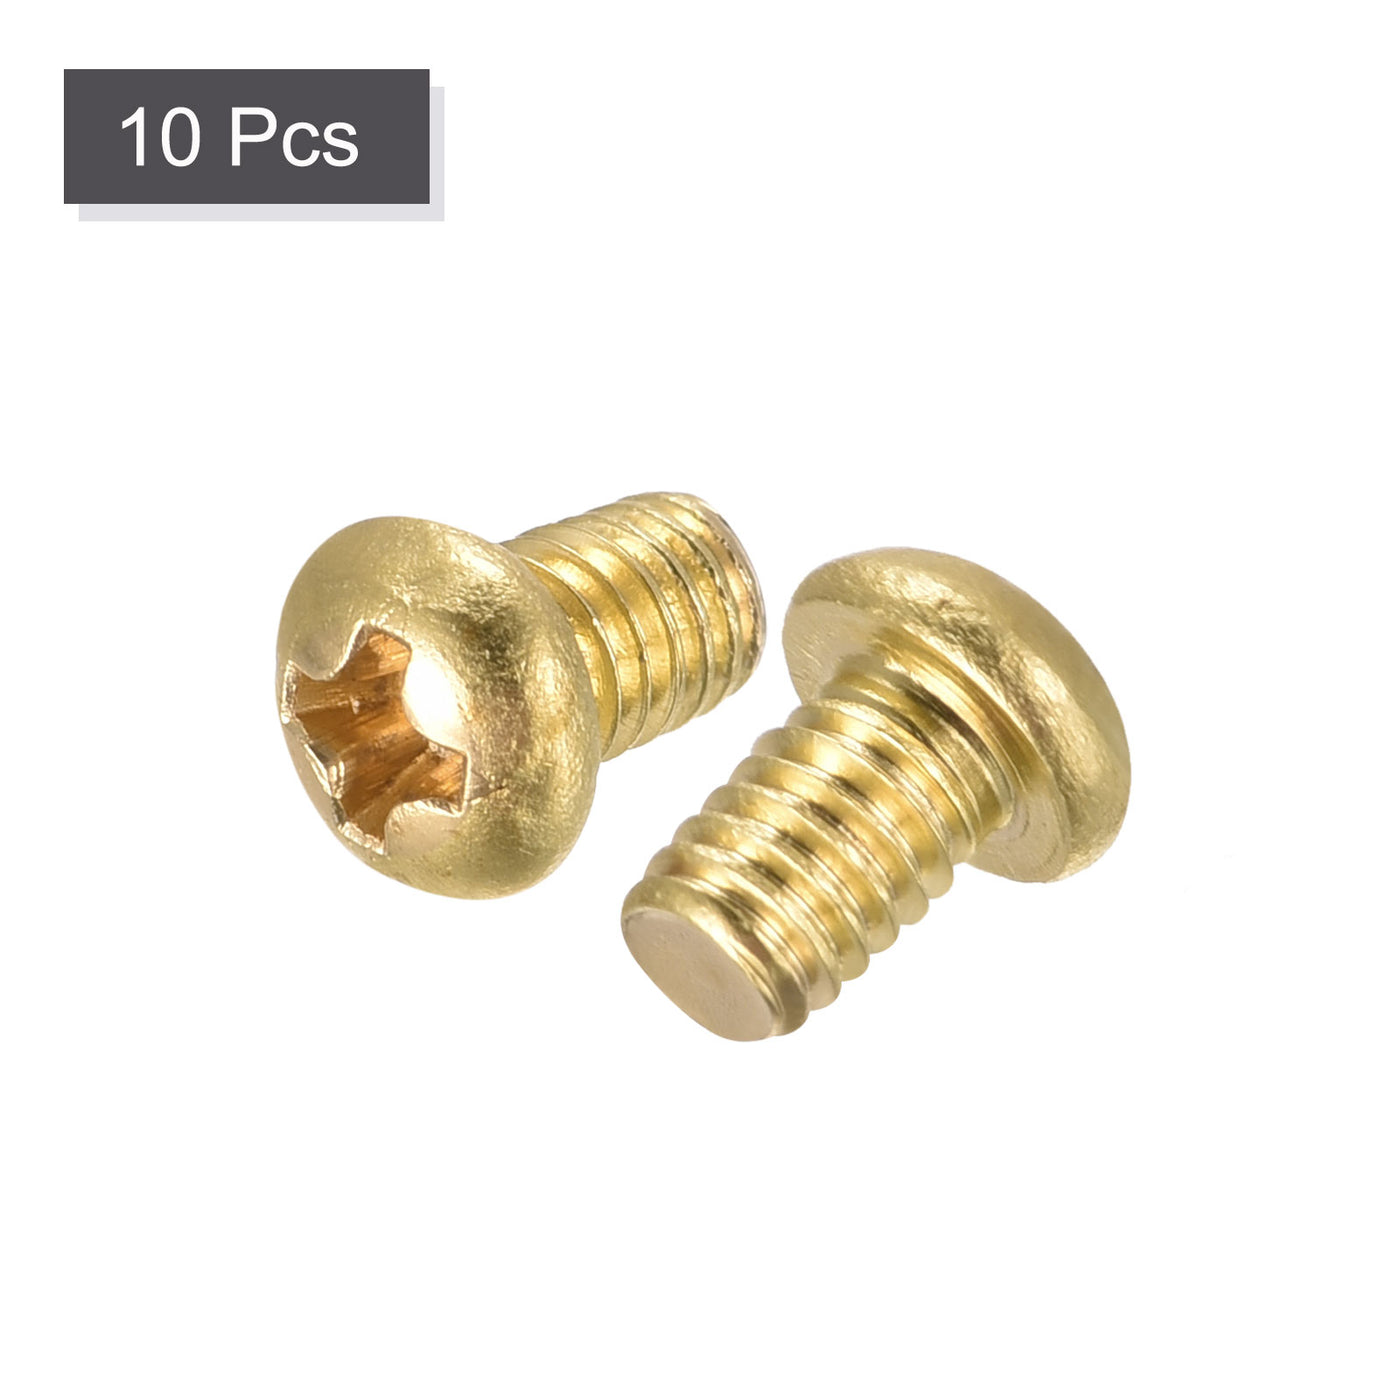 uxcell Uxcell Brass Machine Screws, Phillips Pan Head Fastener Bolts for Furniture, Office Equipment, Electronics